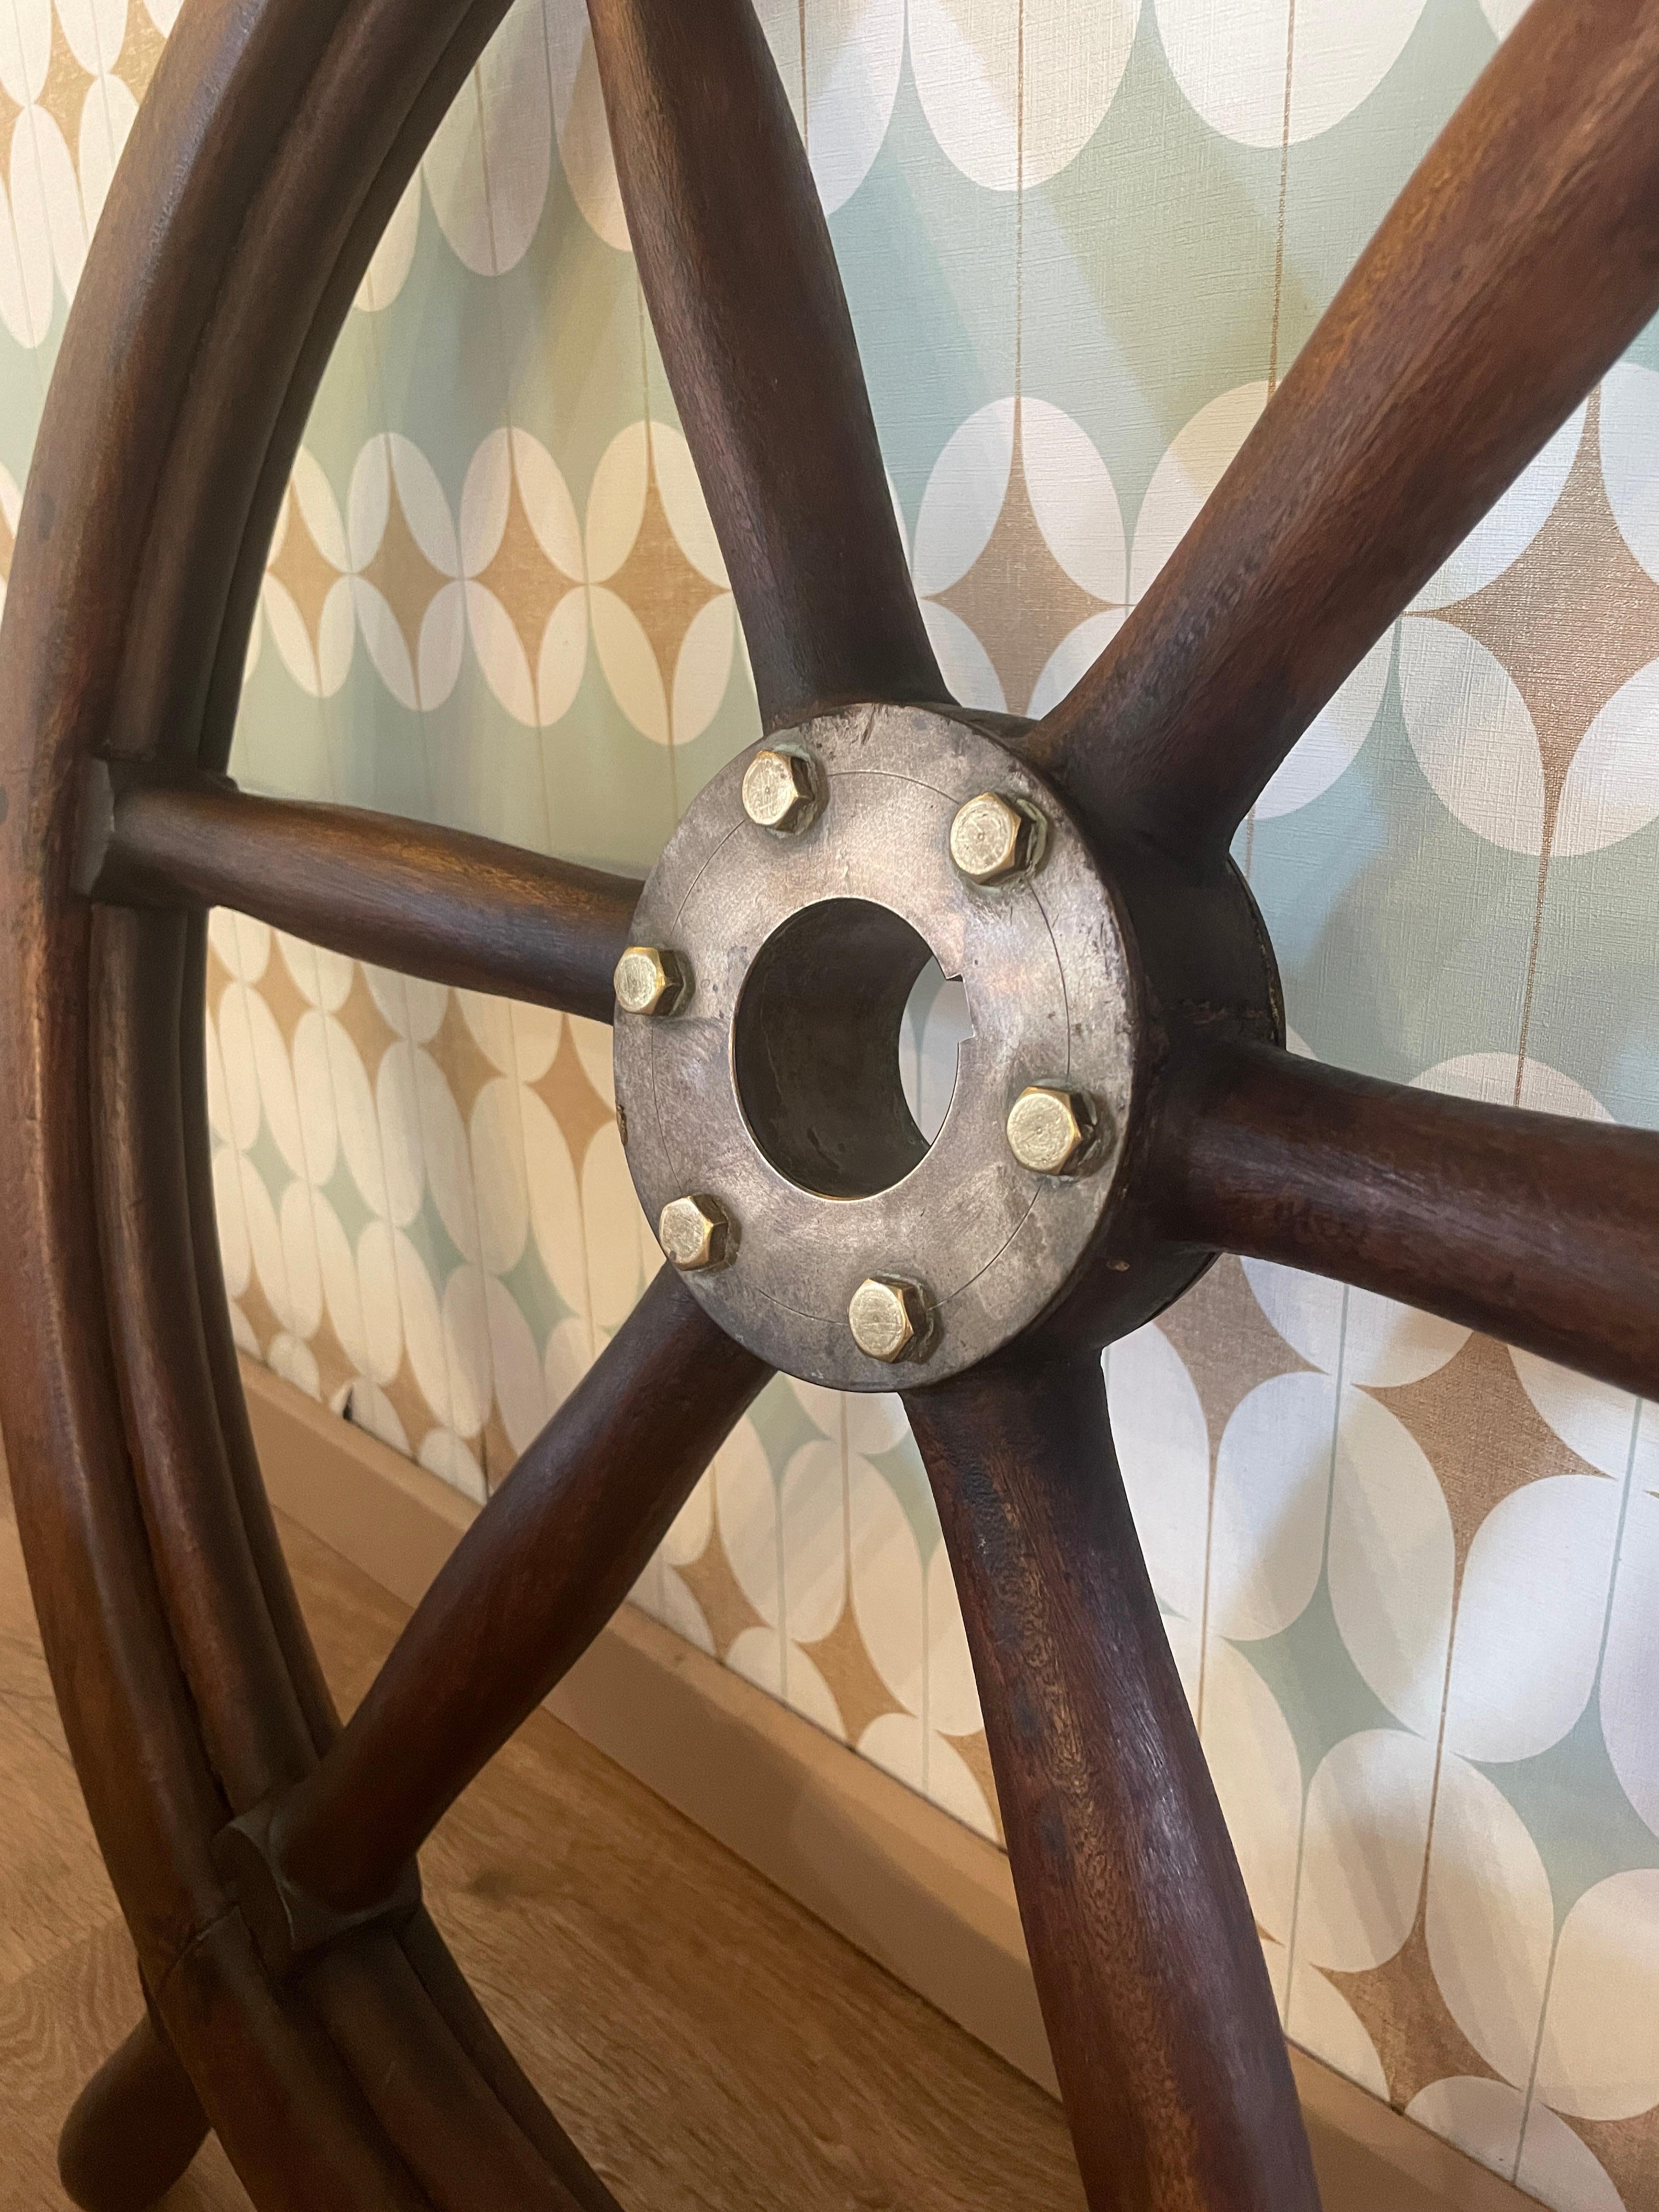 wheel on a ship called